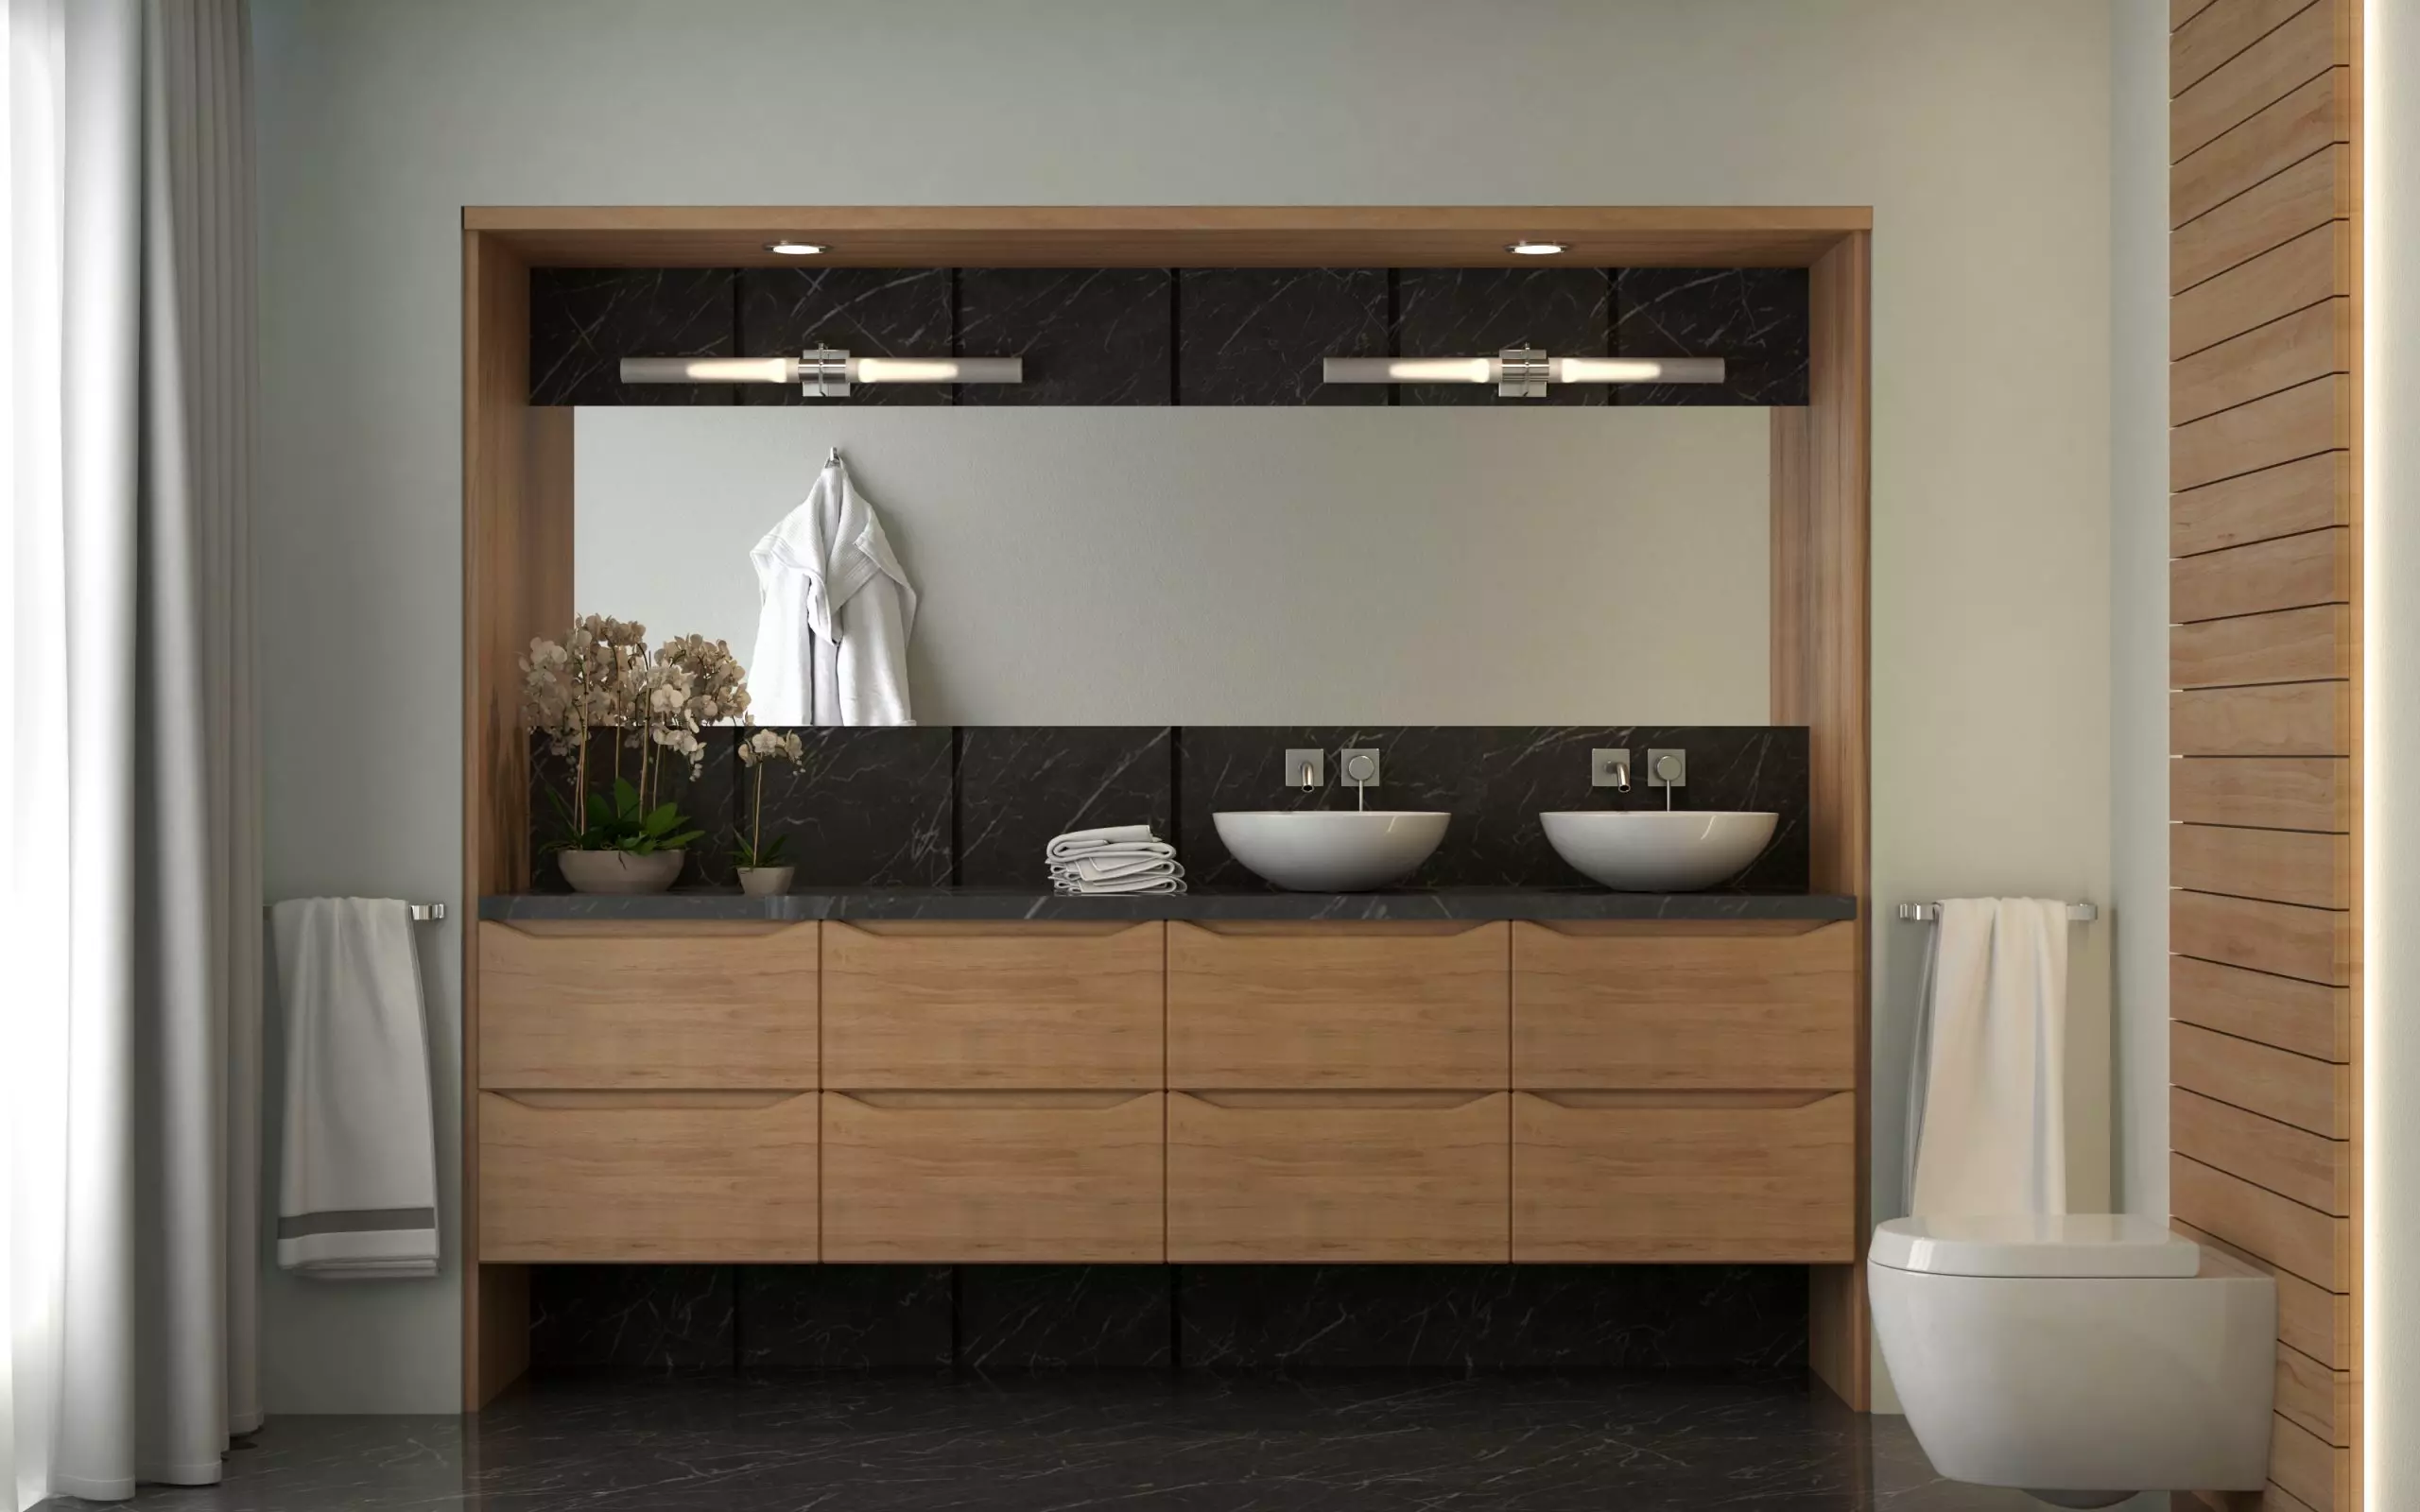 A modern bathroom with a wooden vanity and mirror.